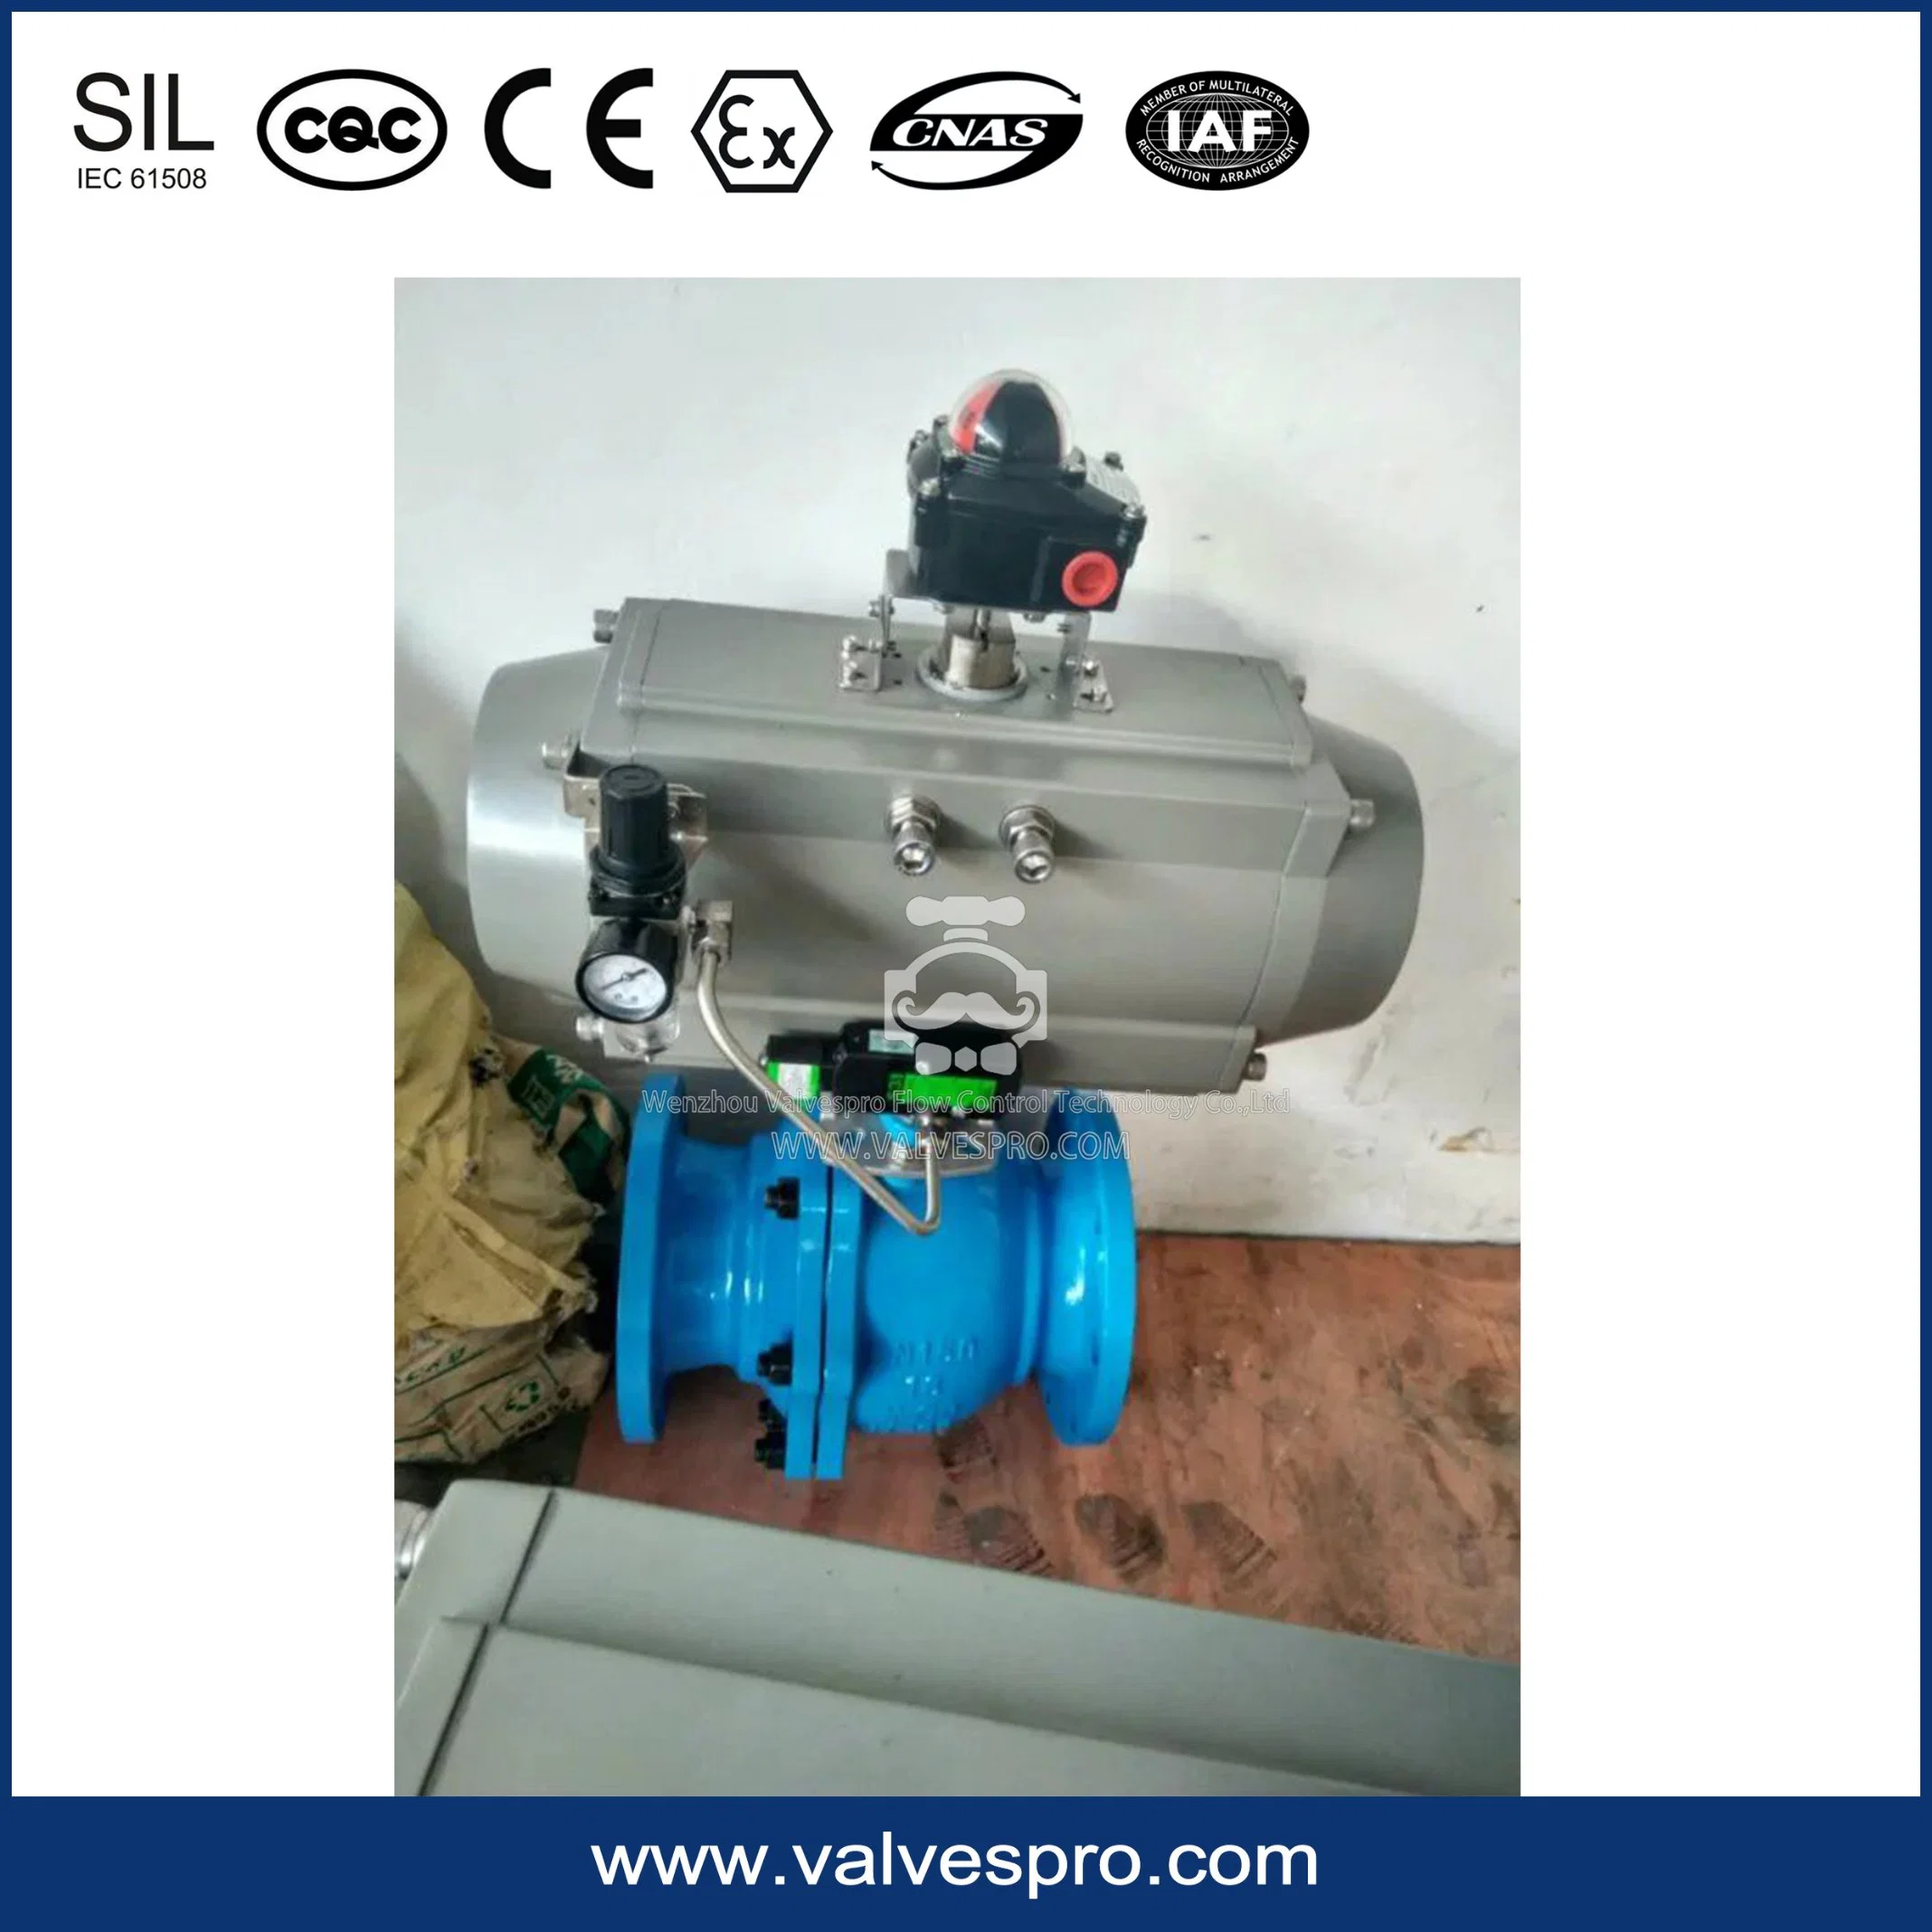 At160s Single Acting Pneumatic Actuator with Pneumatic Component